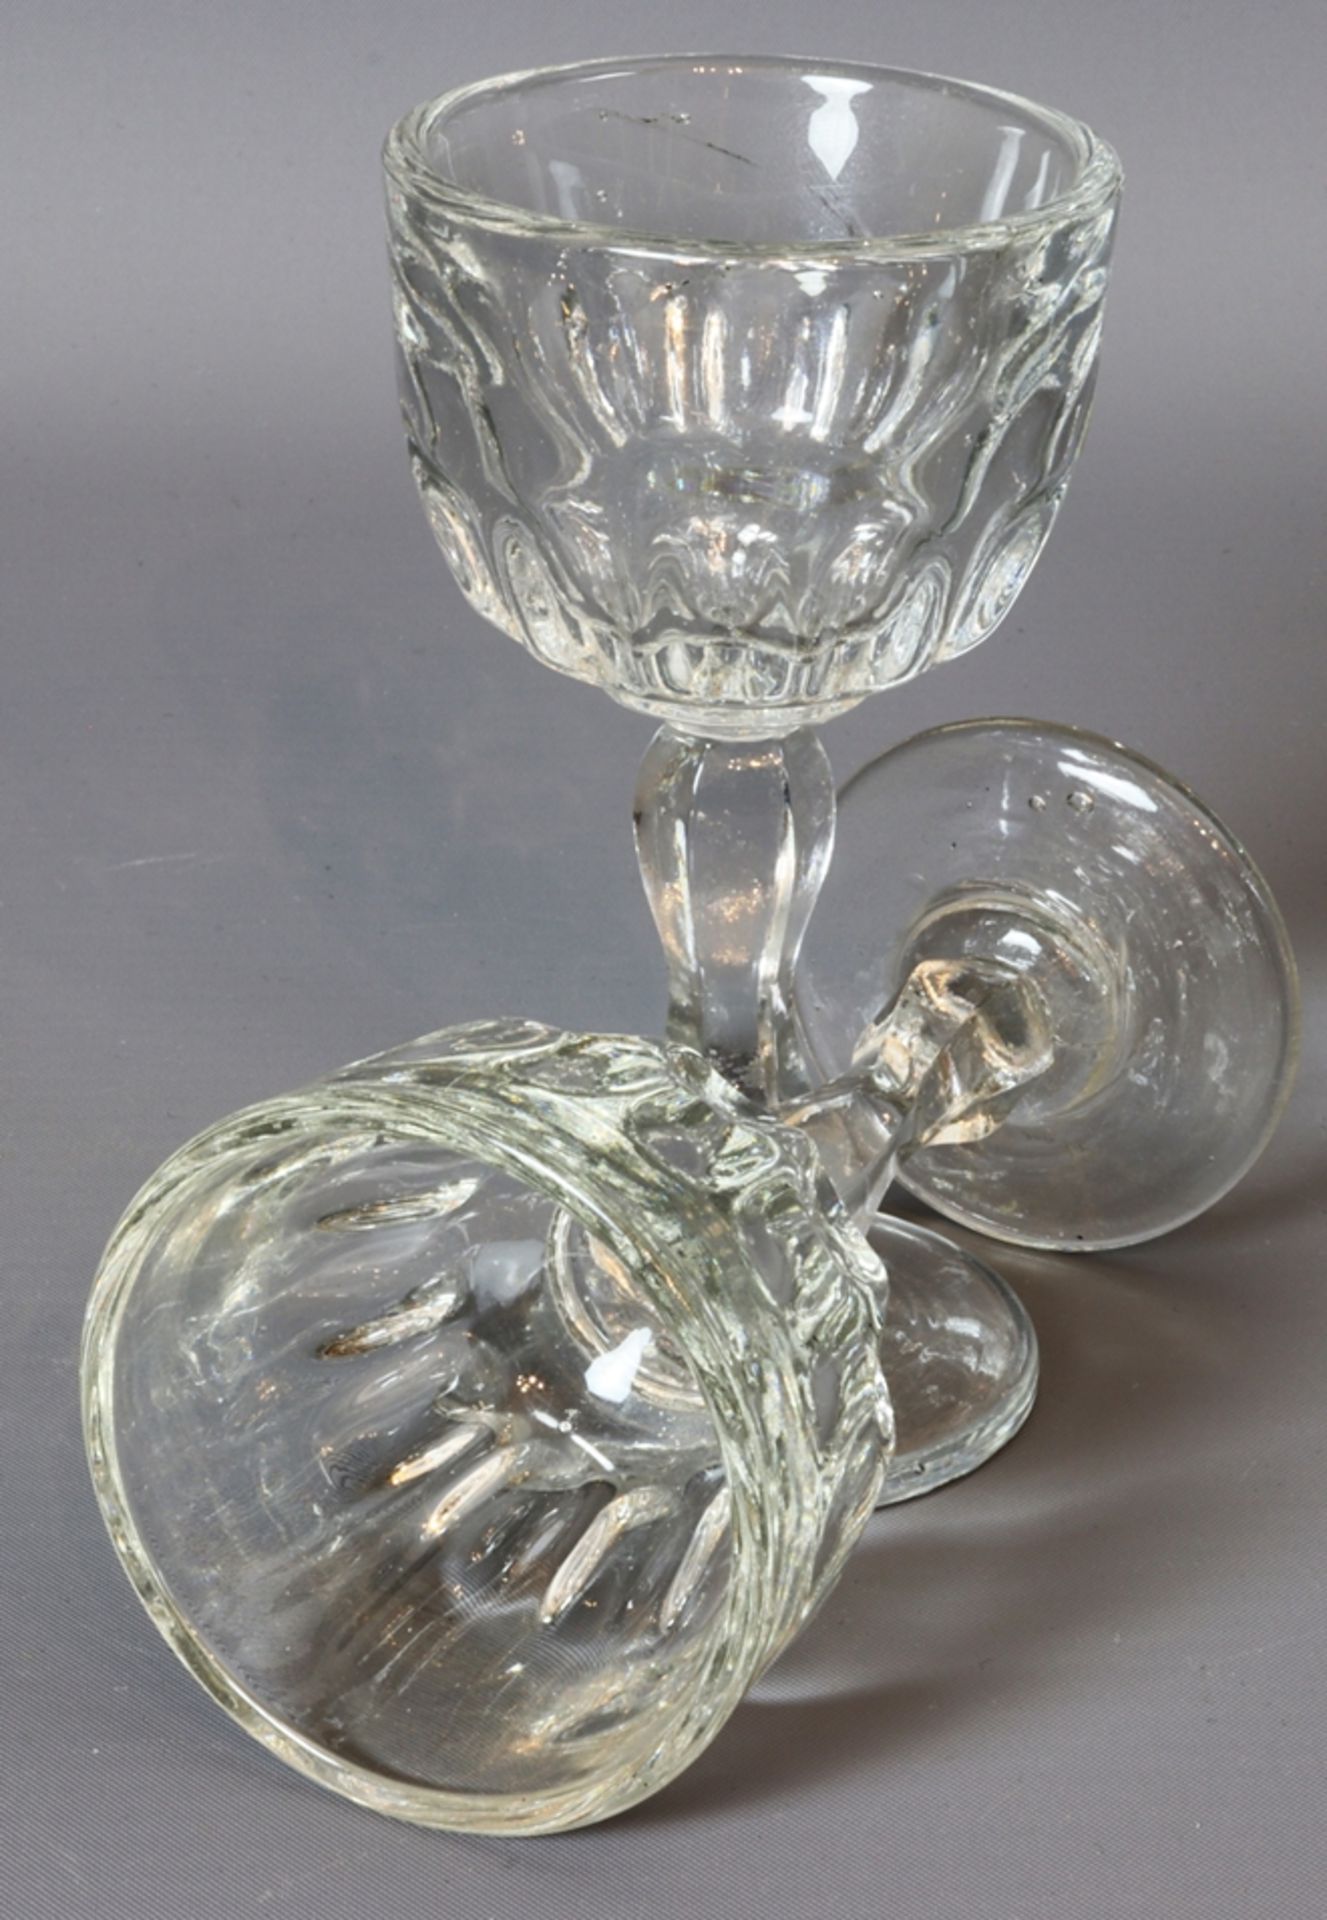 Collection - seven schnapps glasses/pub glasses late 19th/early 20th c., German - Image 3 of 5